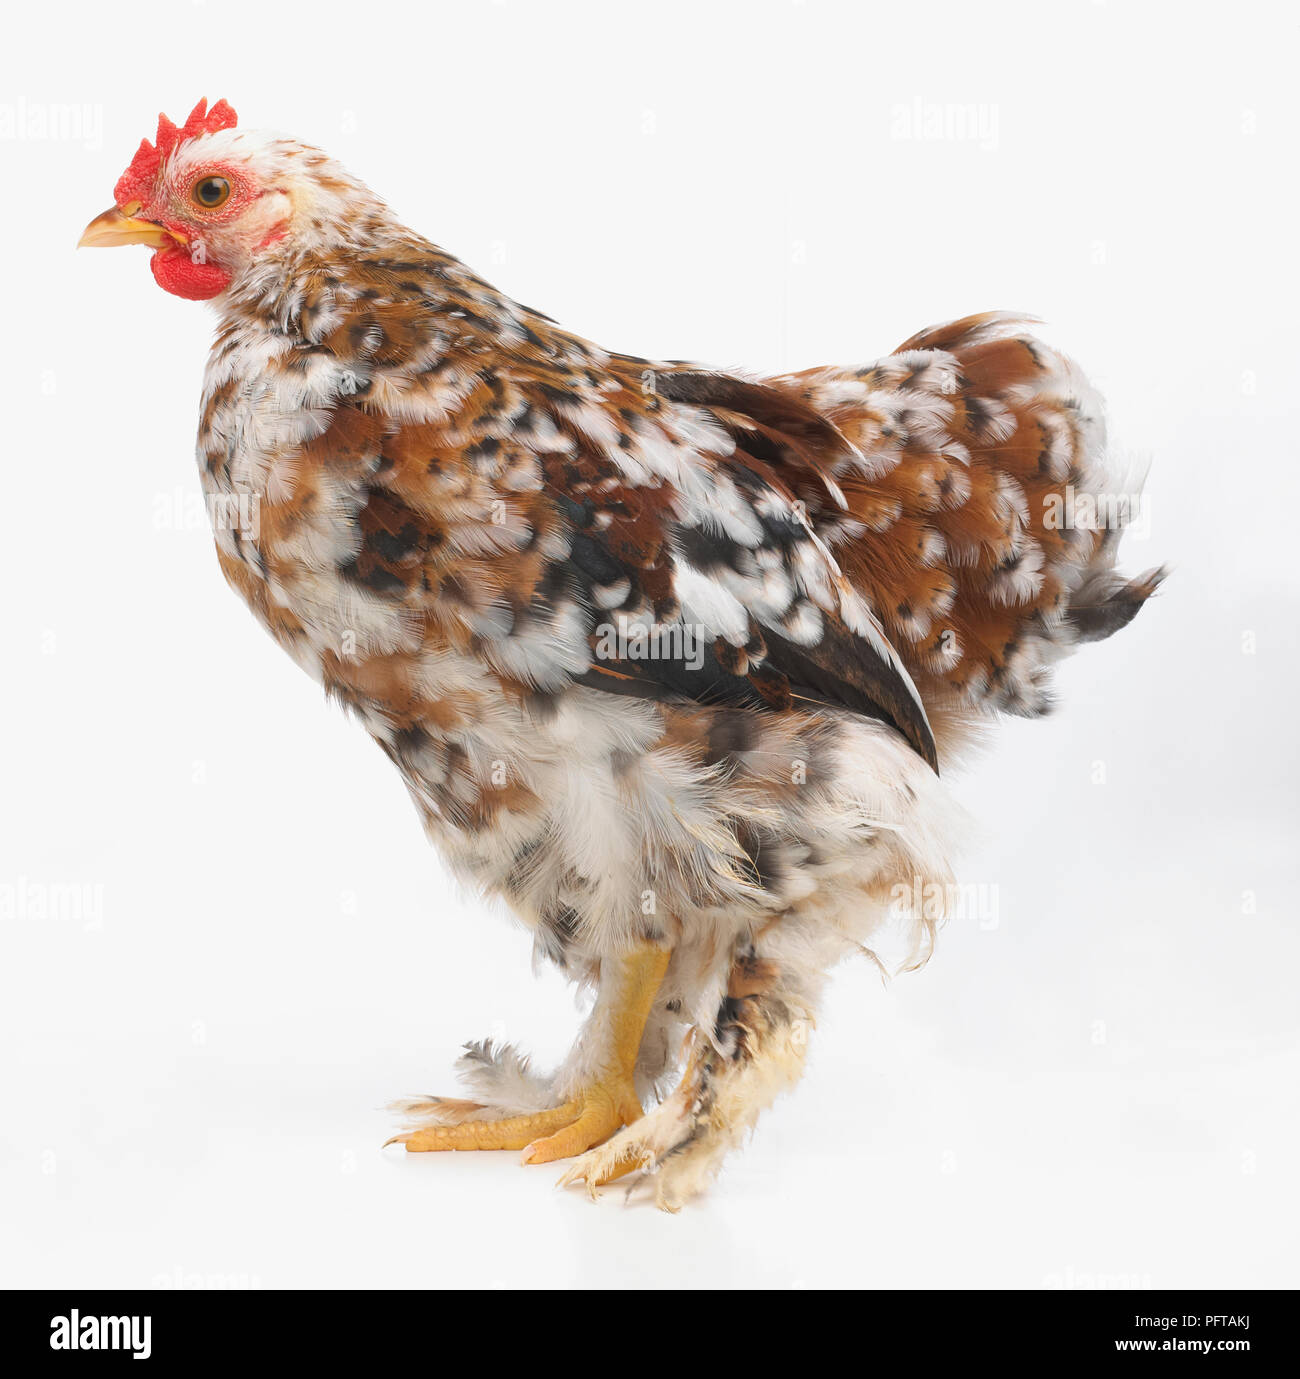 Young, speckled Bantam cockerel or rooster, 2-month-old Stock Photo